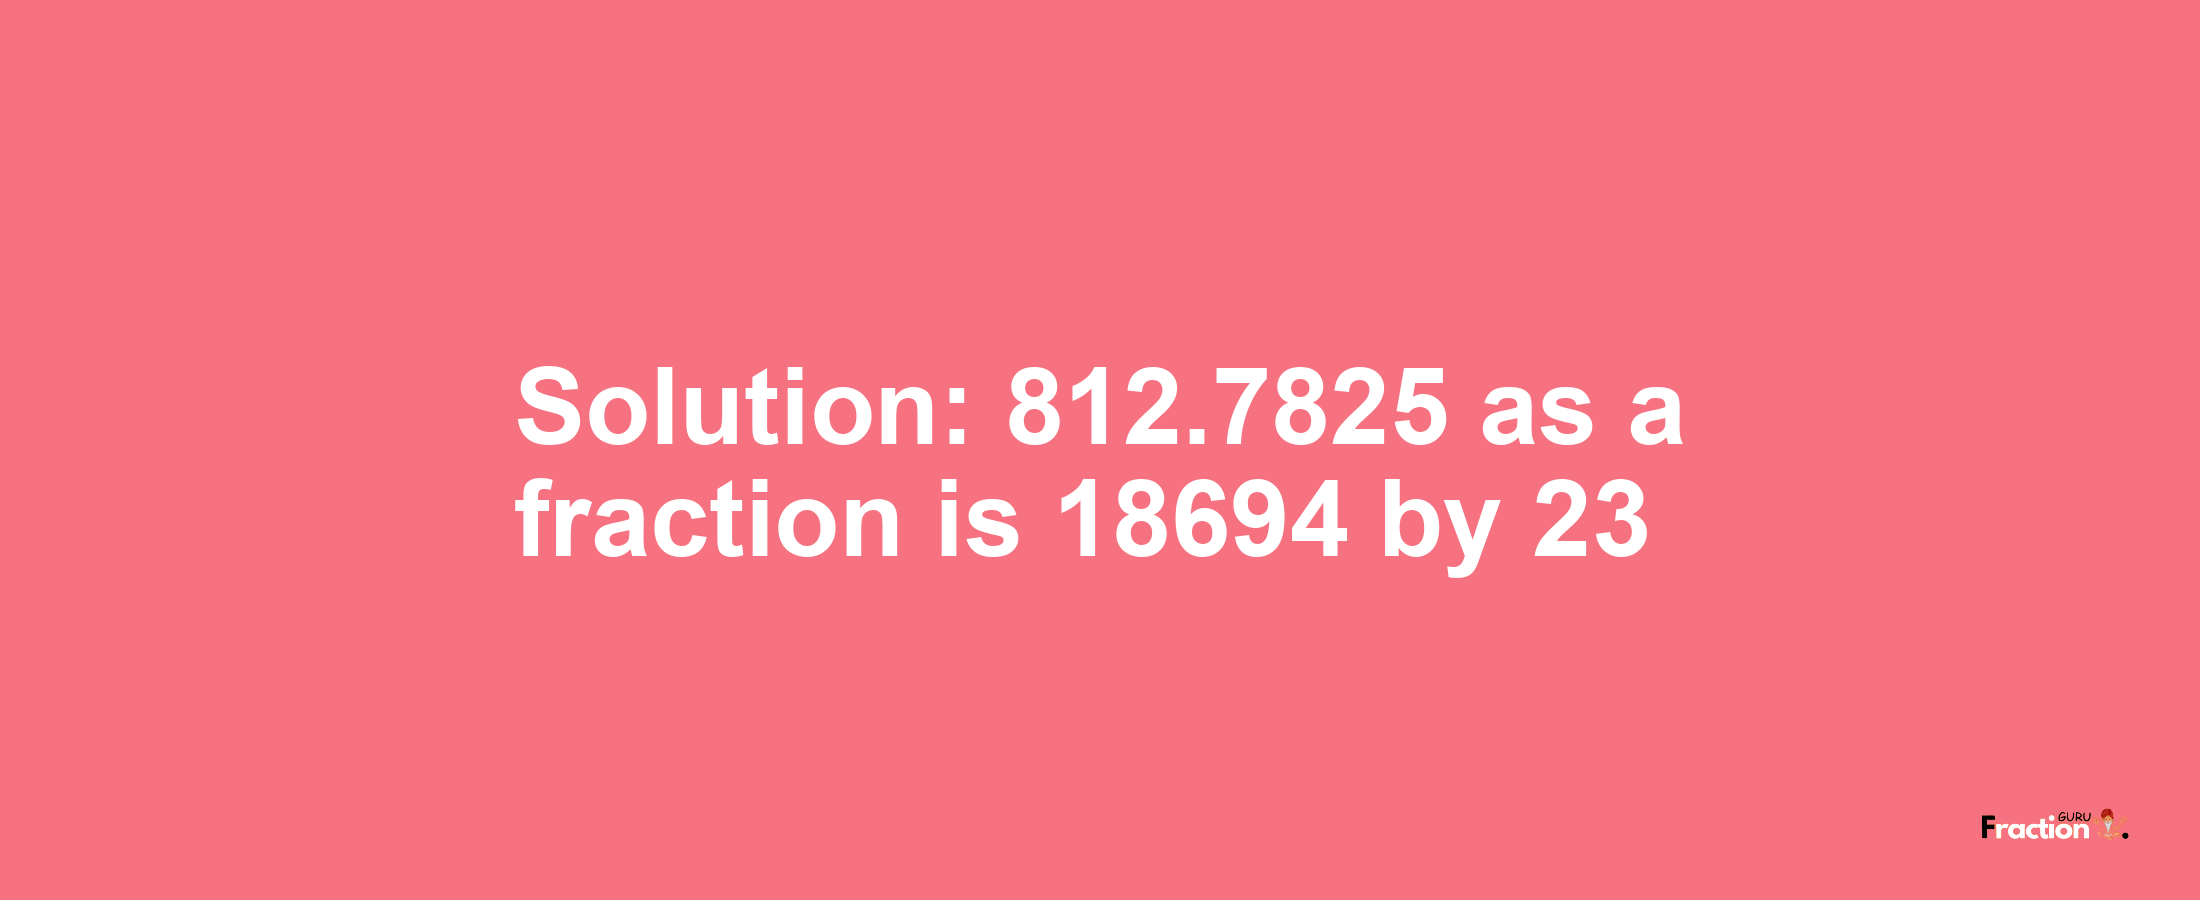 Solution:812.7825 as a fraction is 18694/23